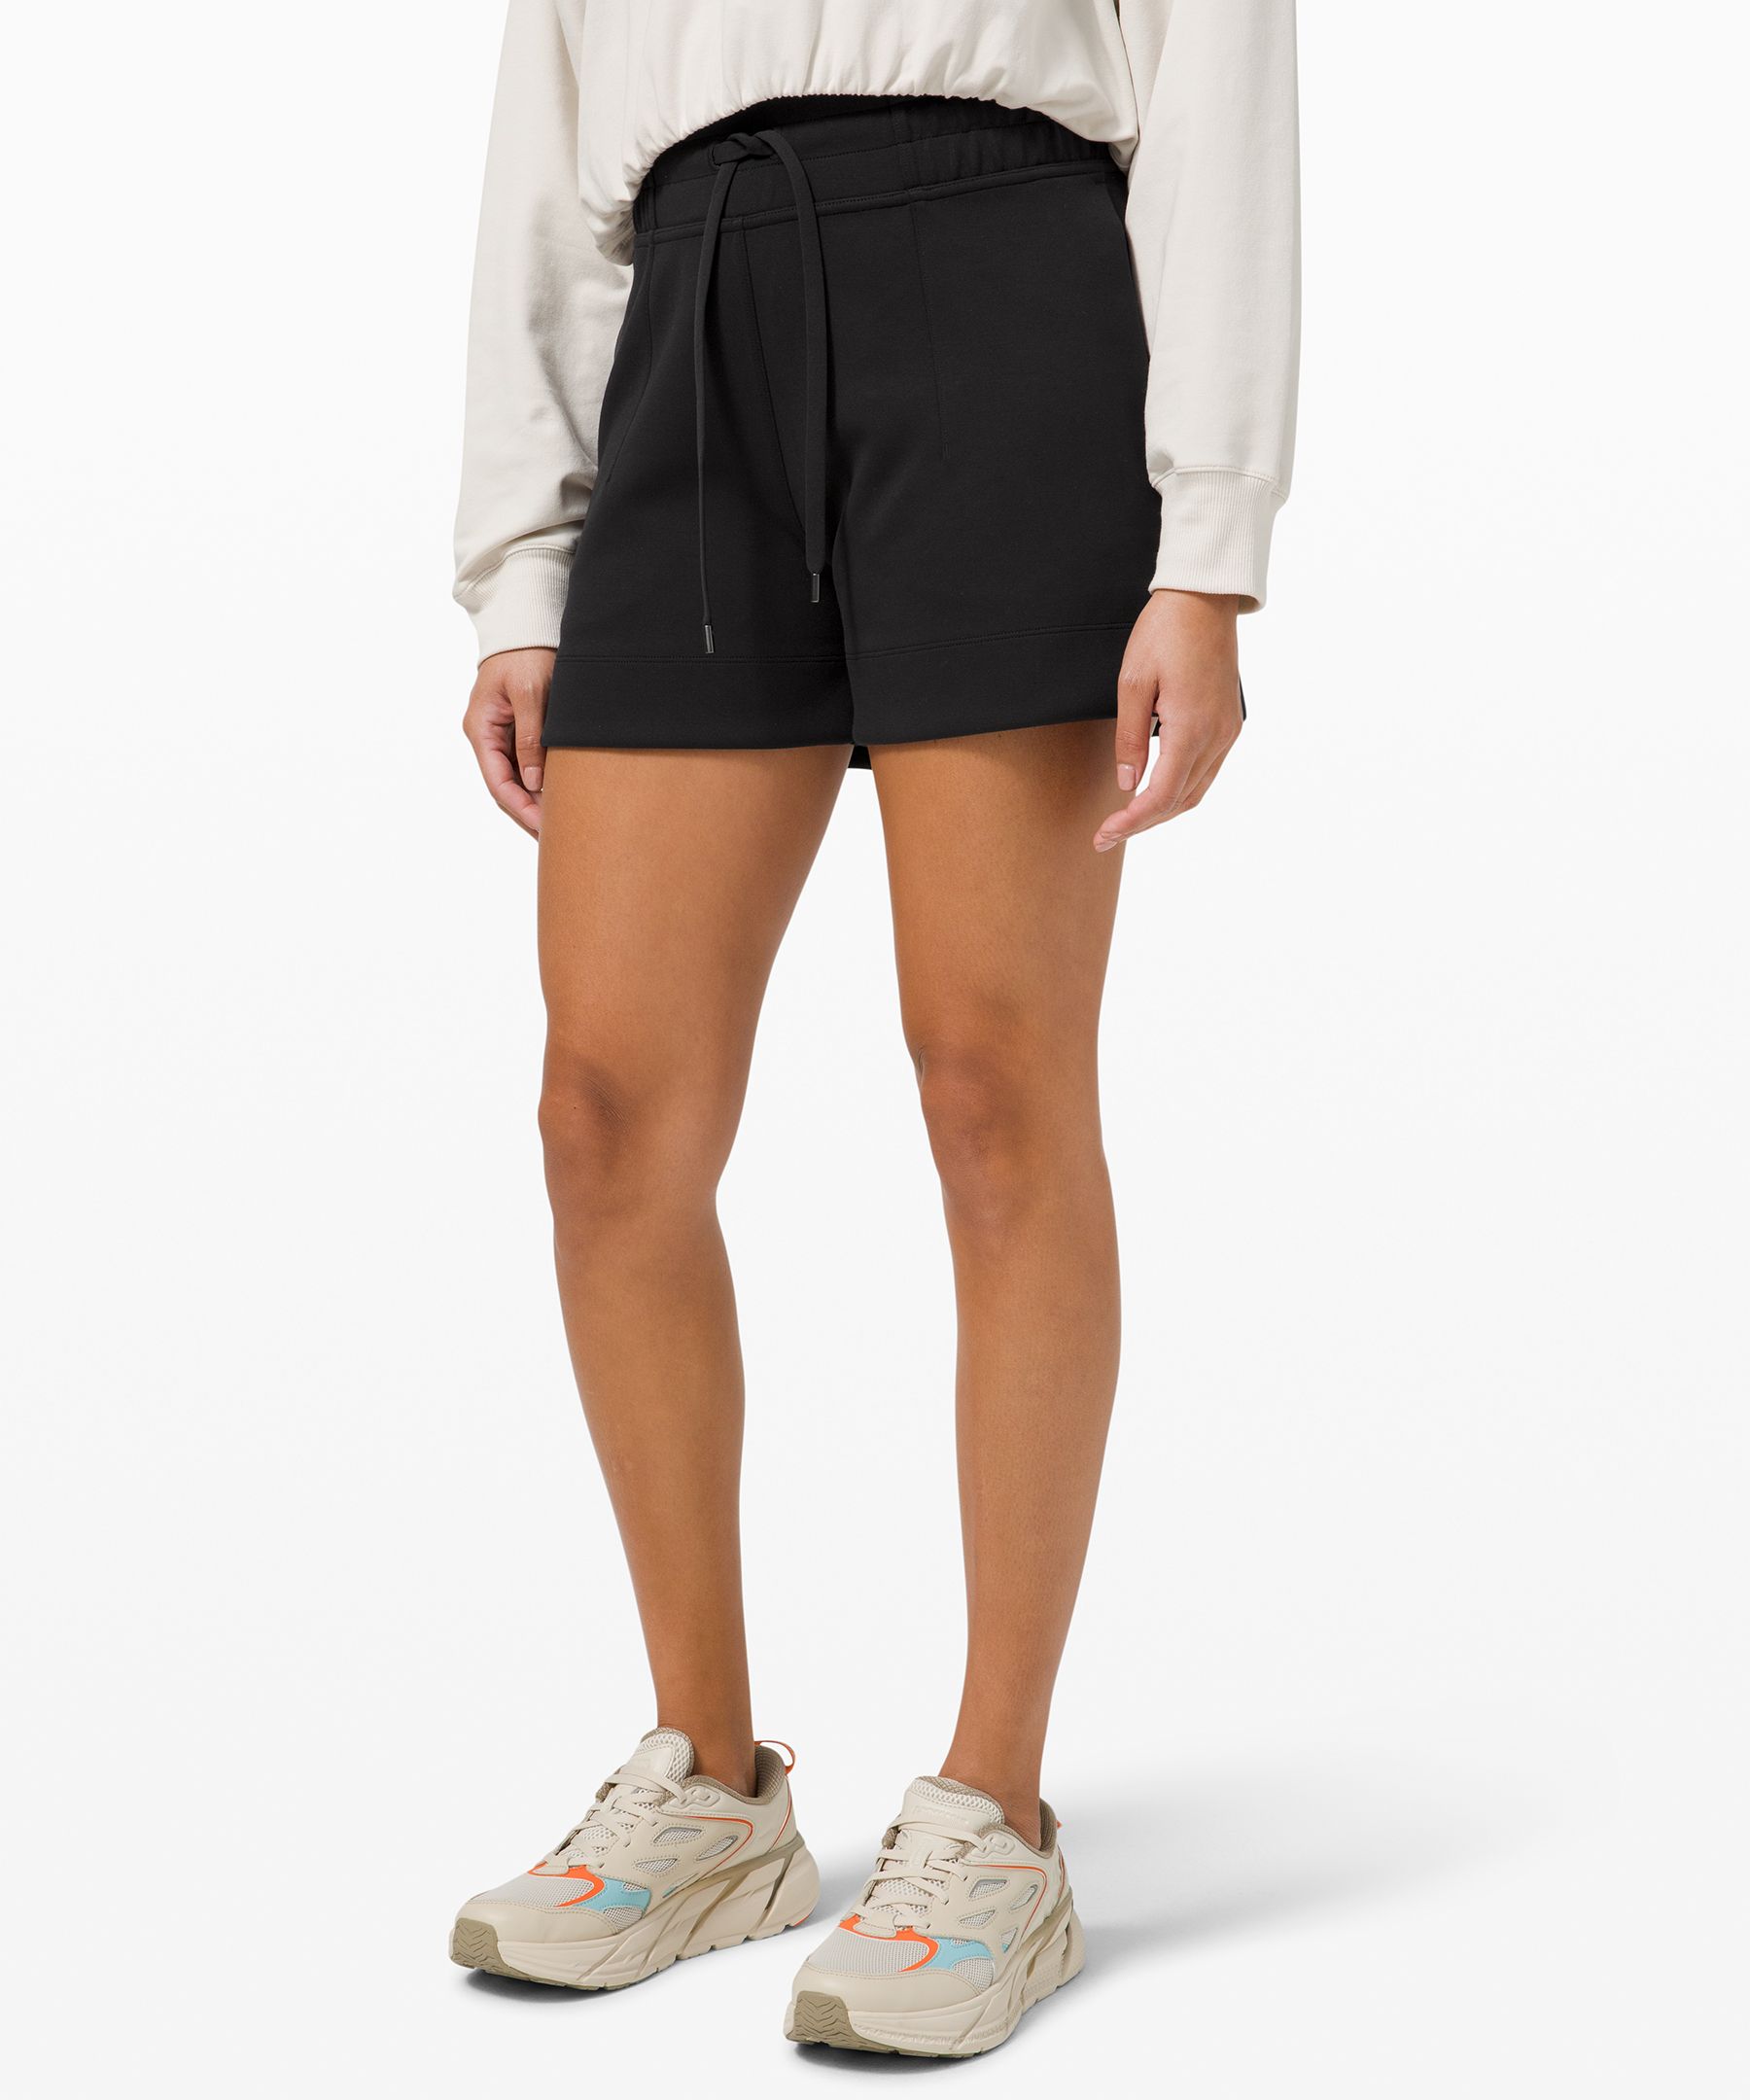 Lululemon Soft Ambitions High-rise Shorts 4" In Black